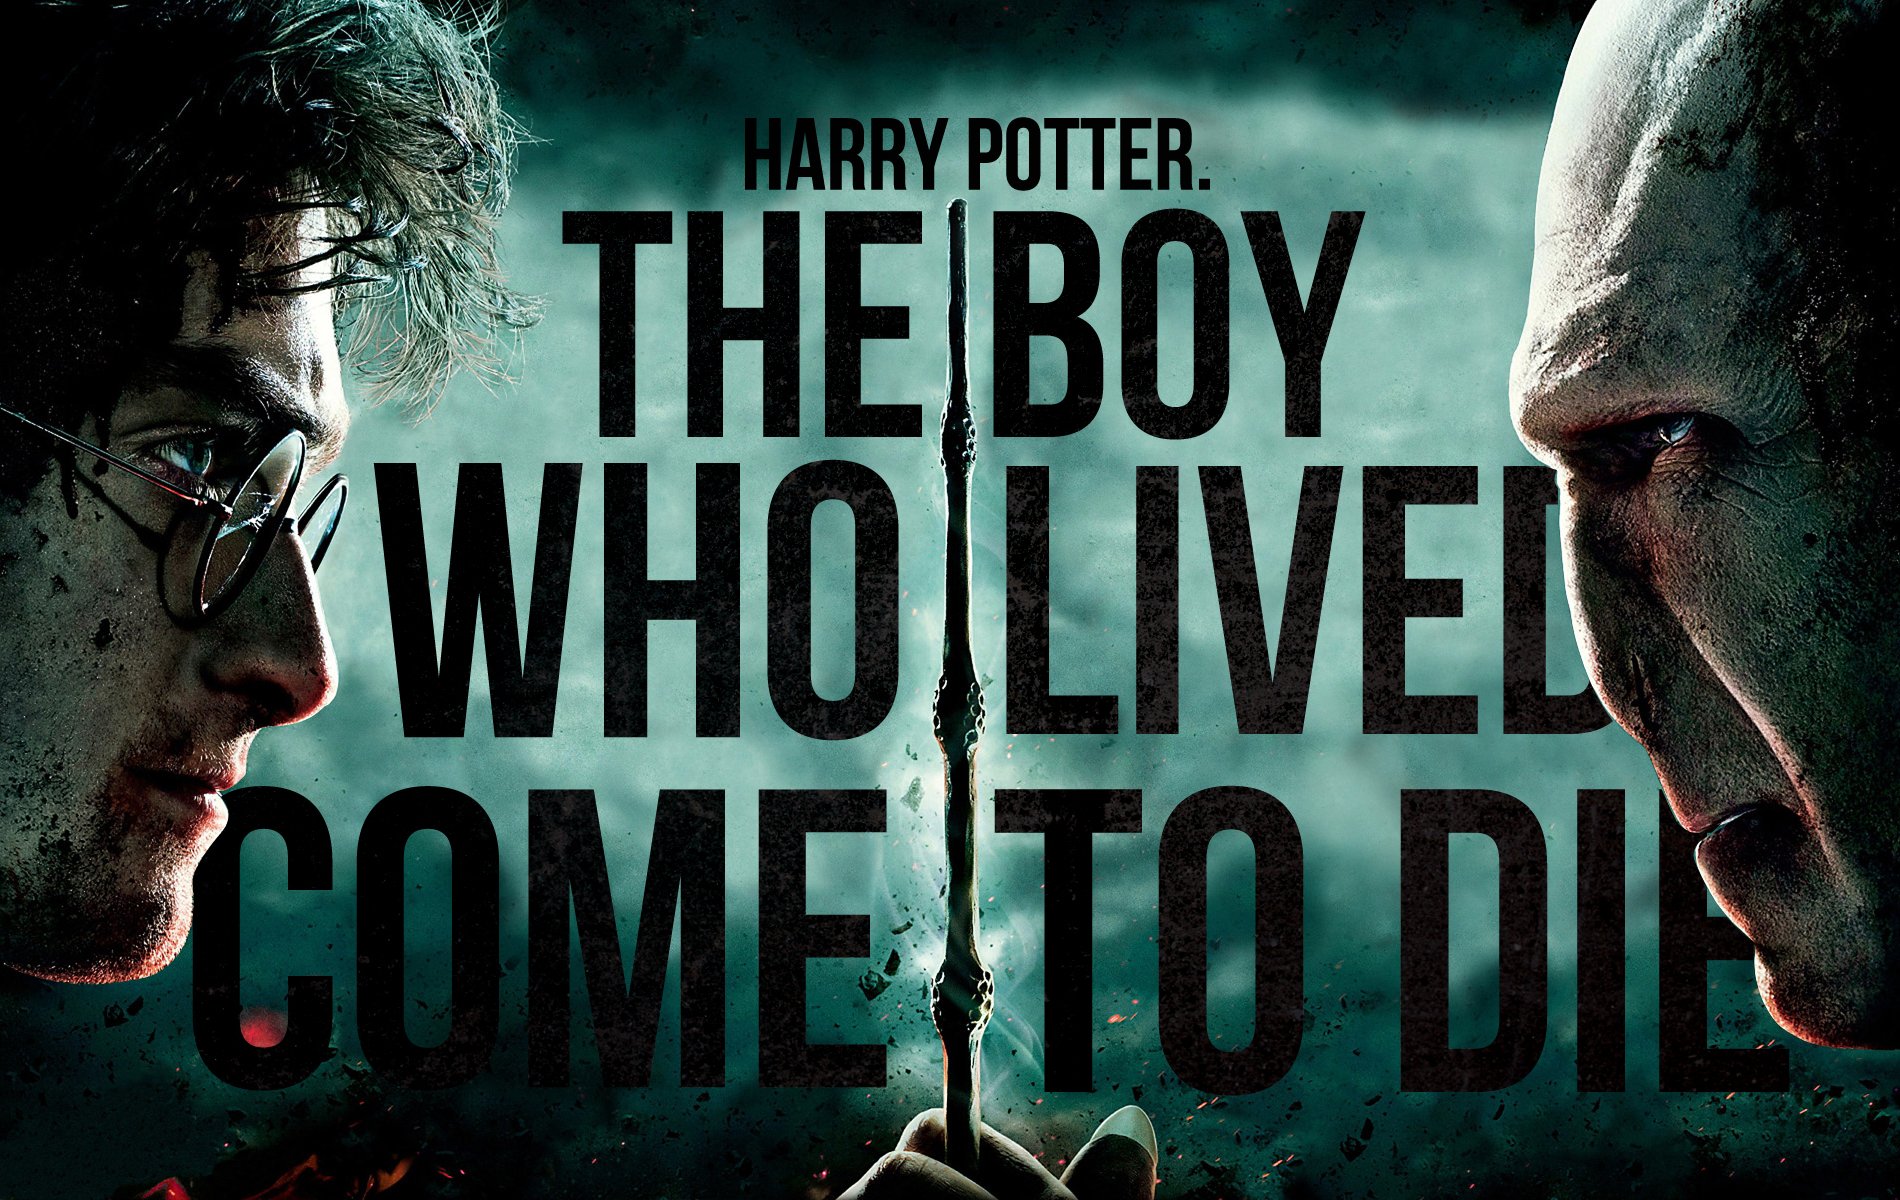 Harry Potter And The Deathly Hallows Part 2 Wallpaper And